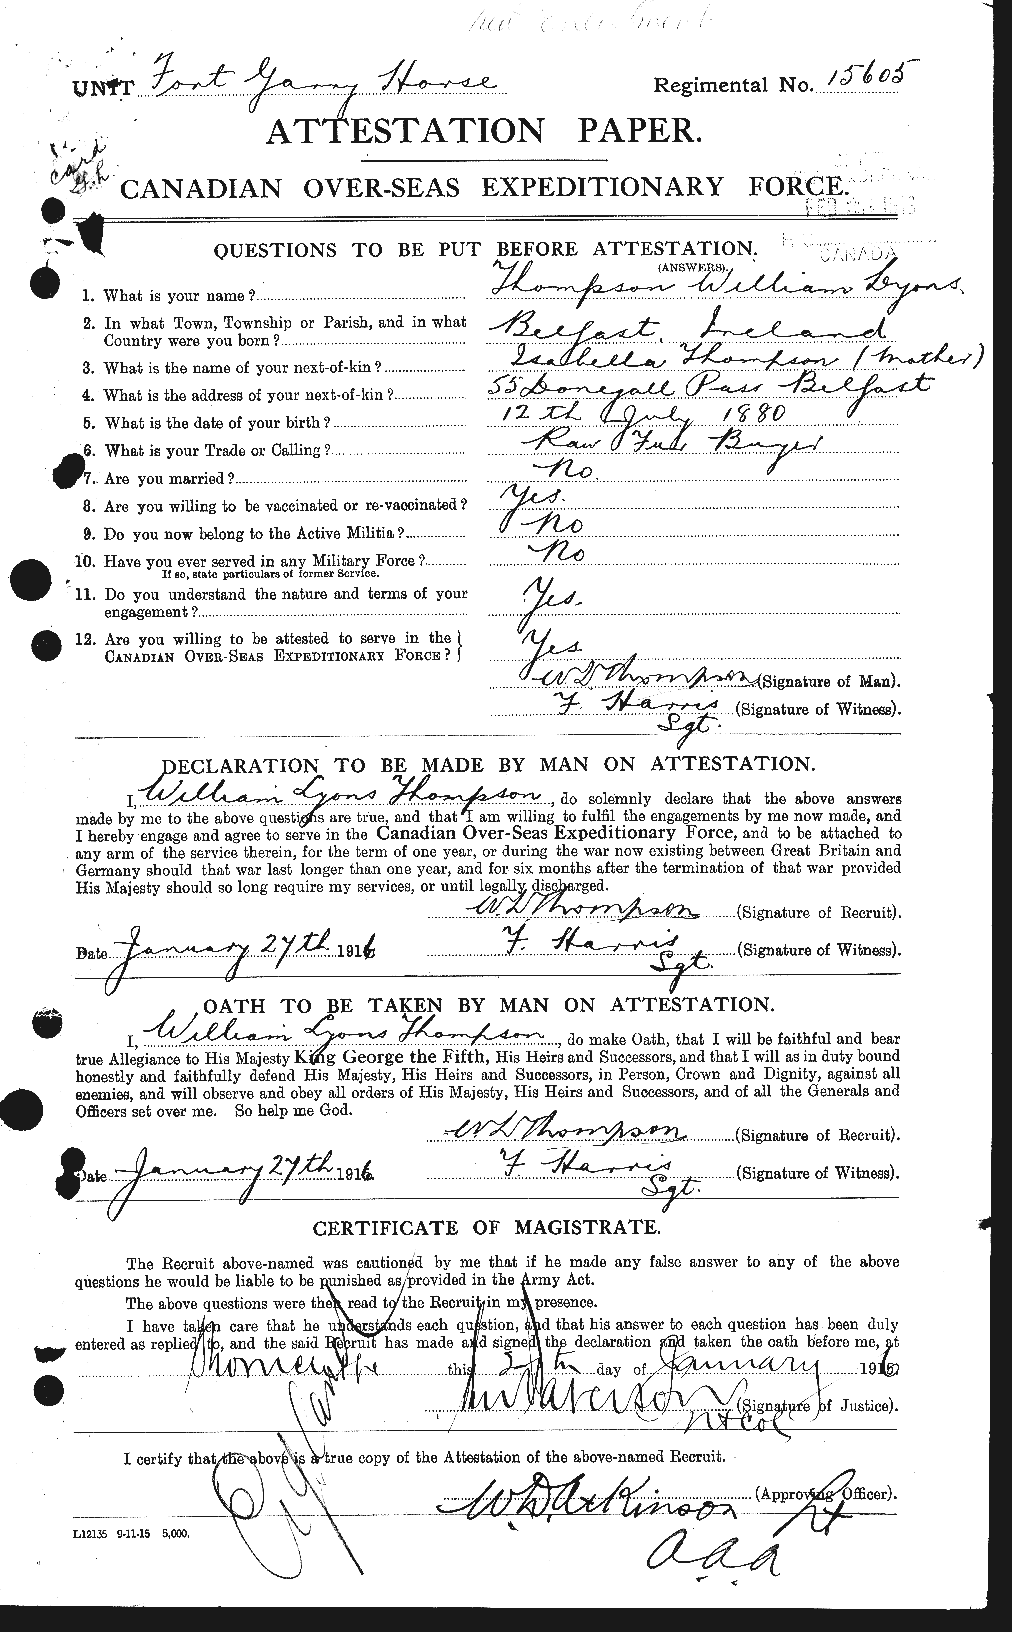 Personnel Records of the First World War - CEF 631052a